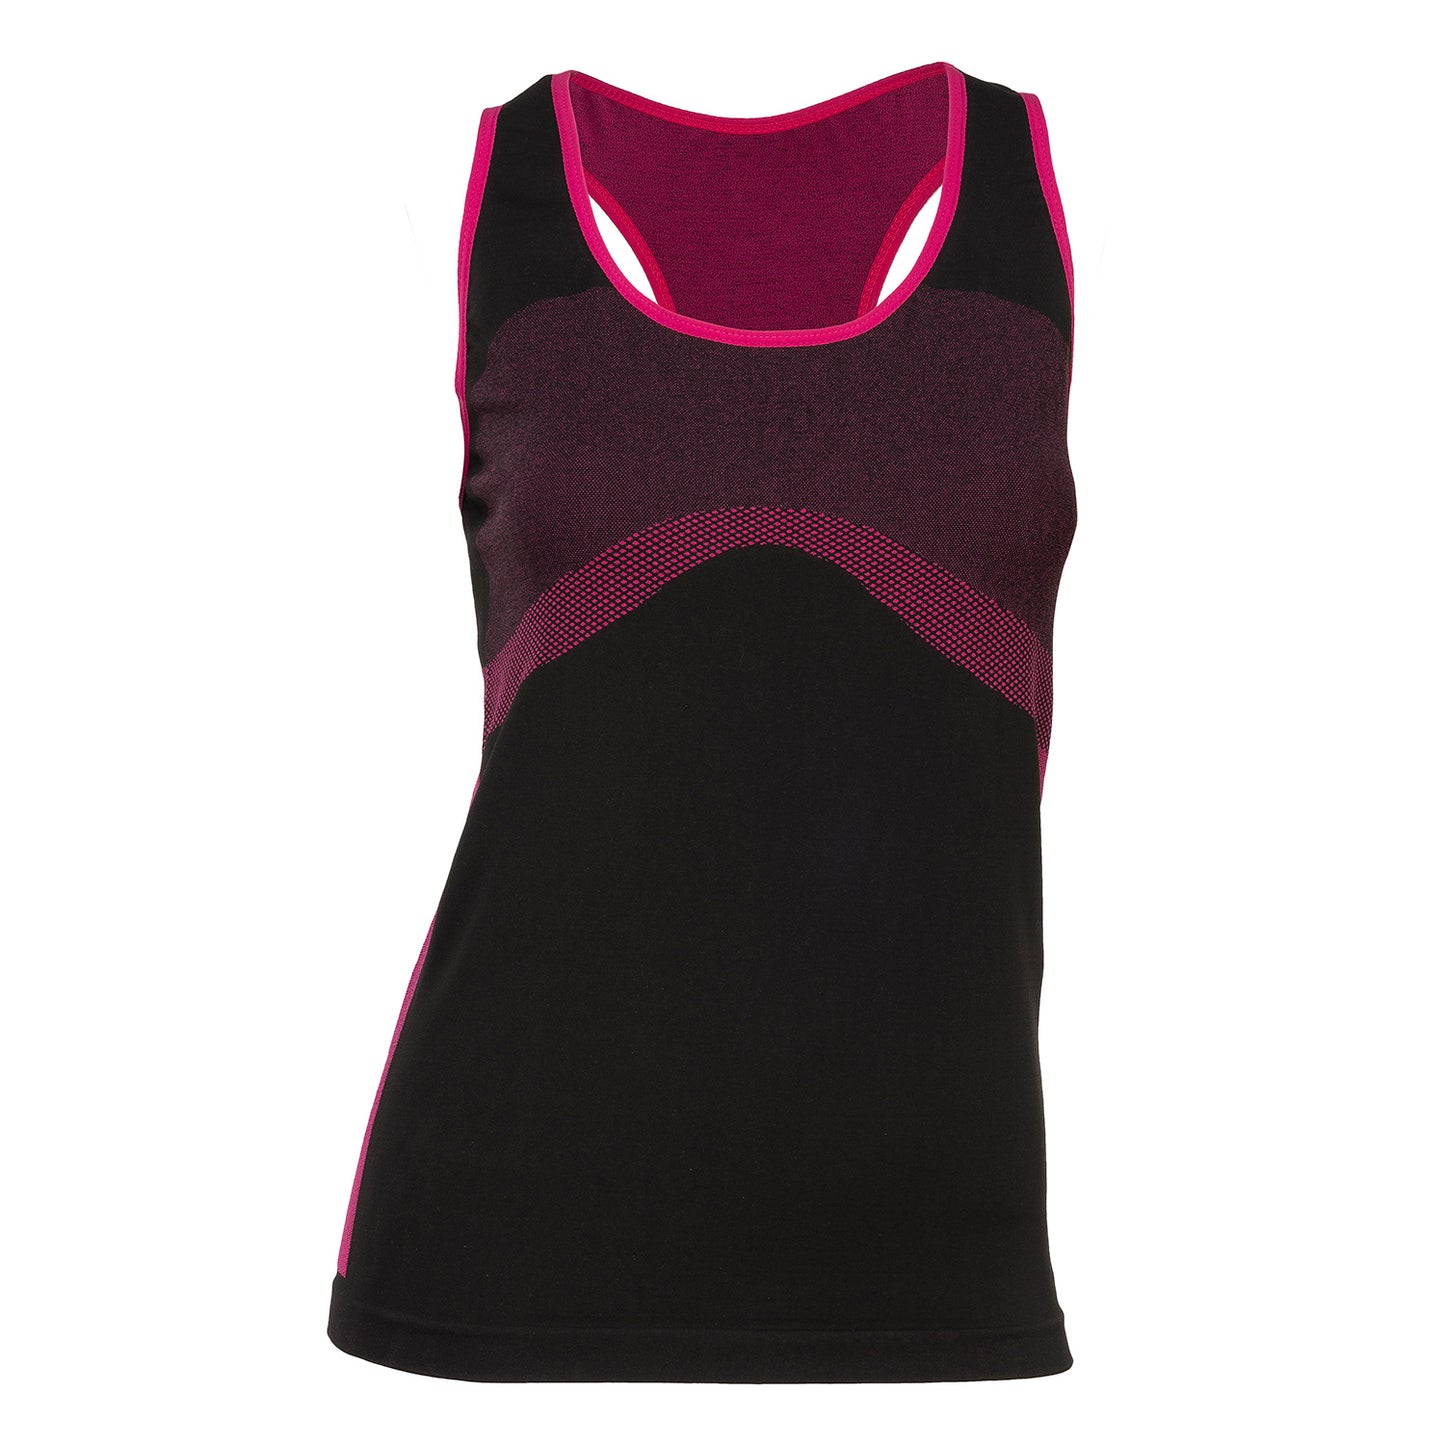 Athleisure Stretchy Sport Workout Tank Top